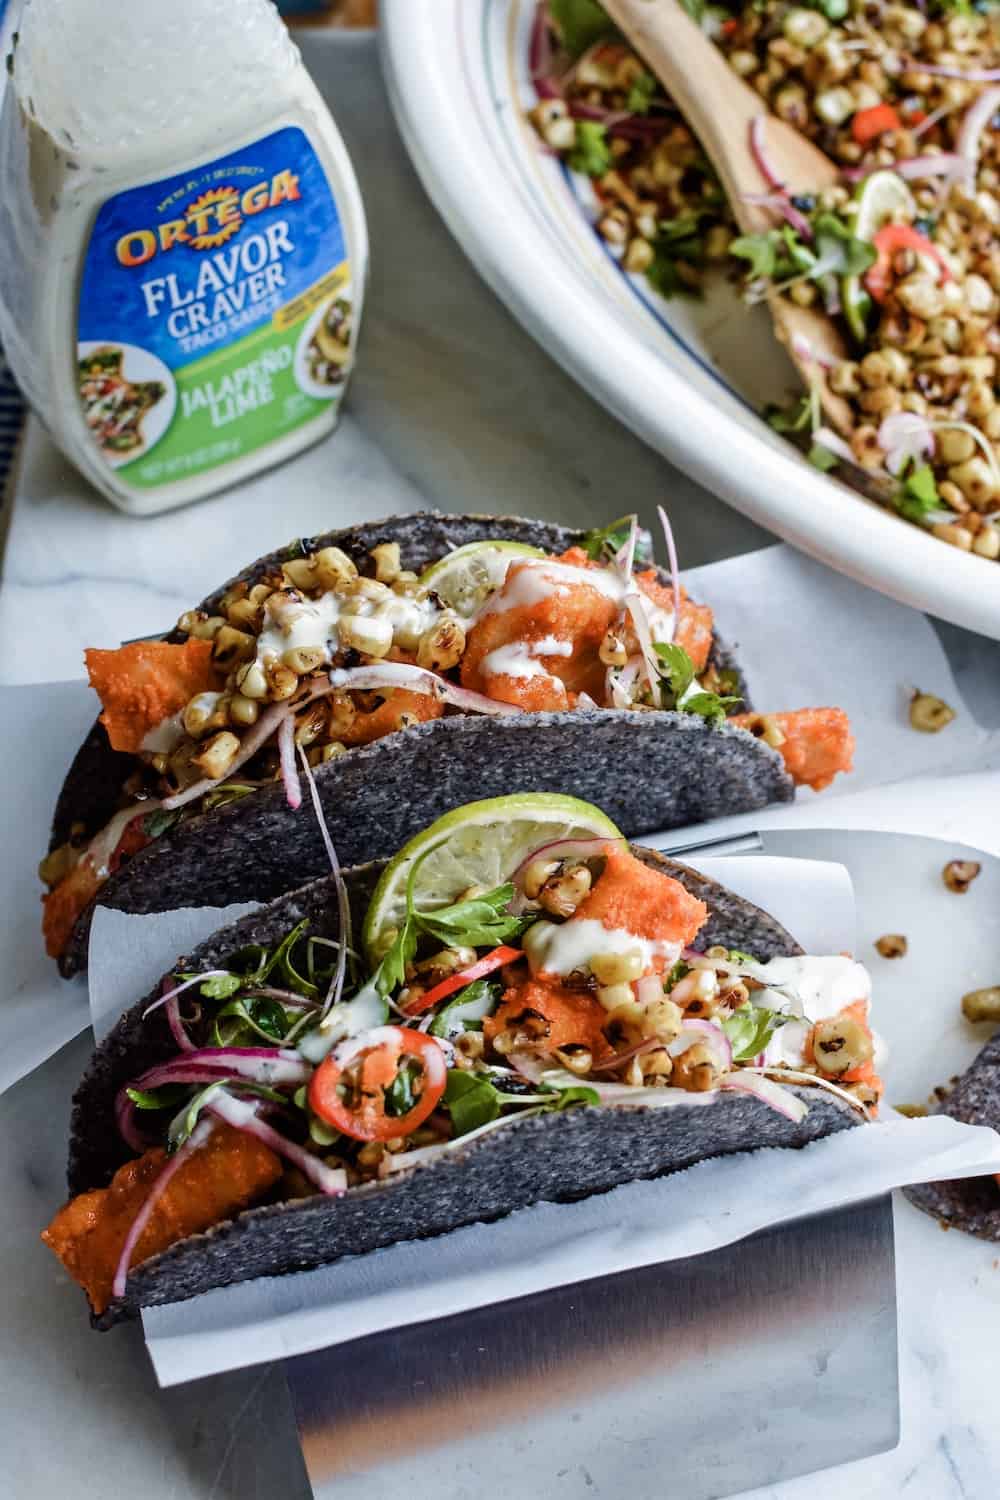 Baked Wild Alaskan Cod Tacos make the BEST healthy Mexican recipe. Stuffed into crispy blue corn tortilla shells and topped with a toasted corn salad. #ad #ortega #holajalapeno #fishtacos #codtacos